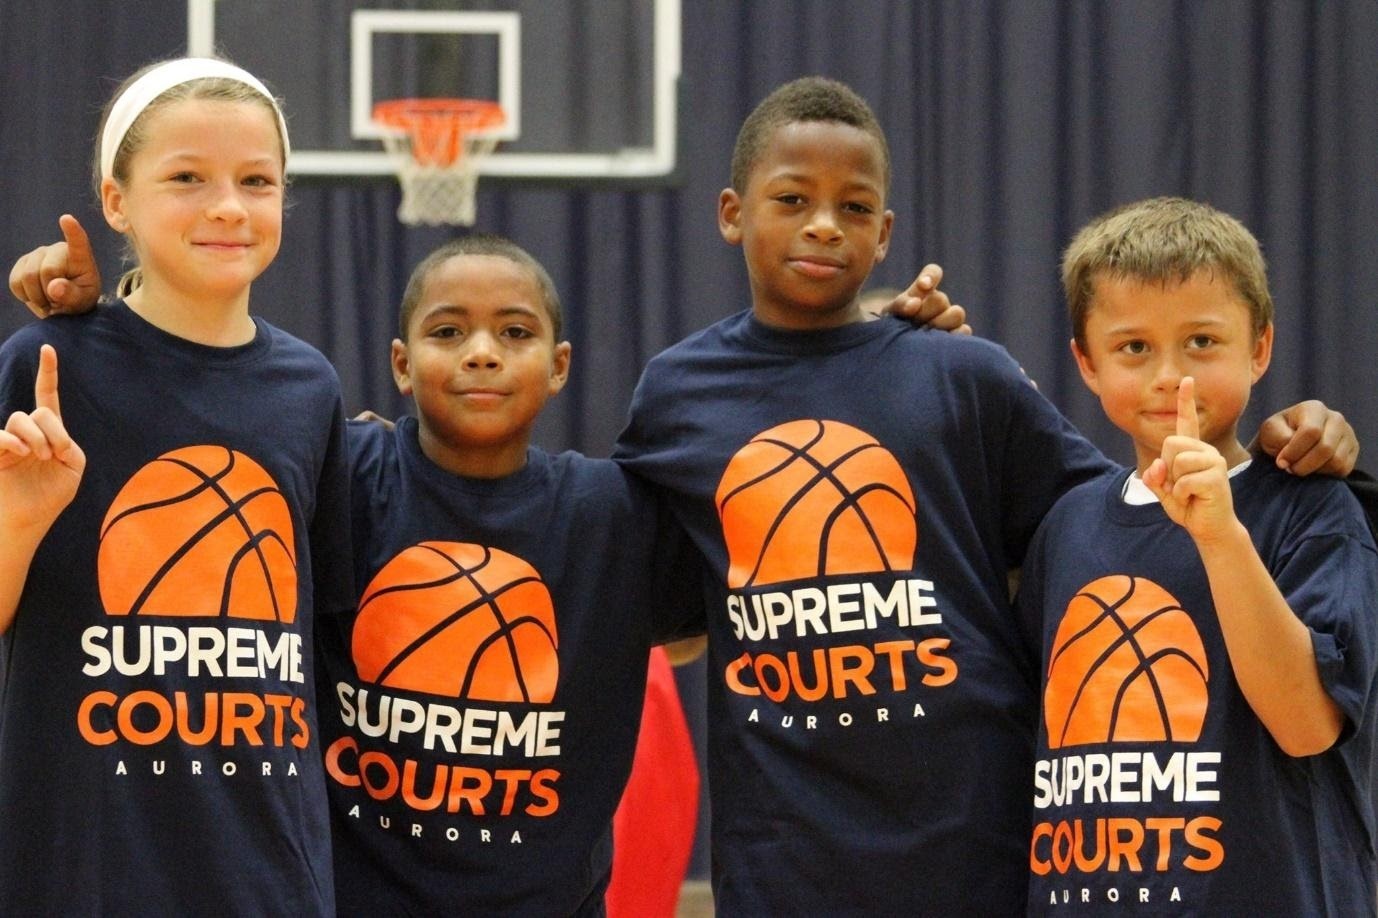 The Chicago-based Supreme Courts are one of Chicago's most trusted and respected professional basketball courts